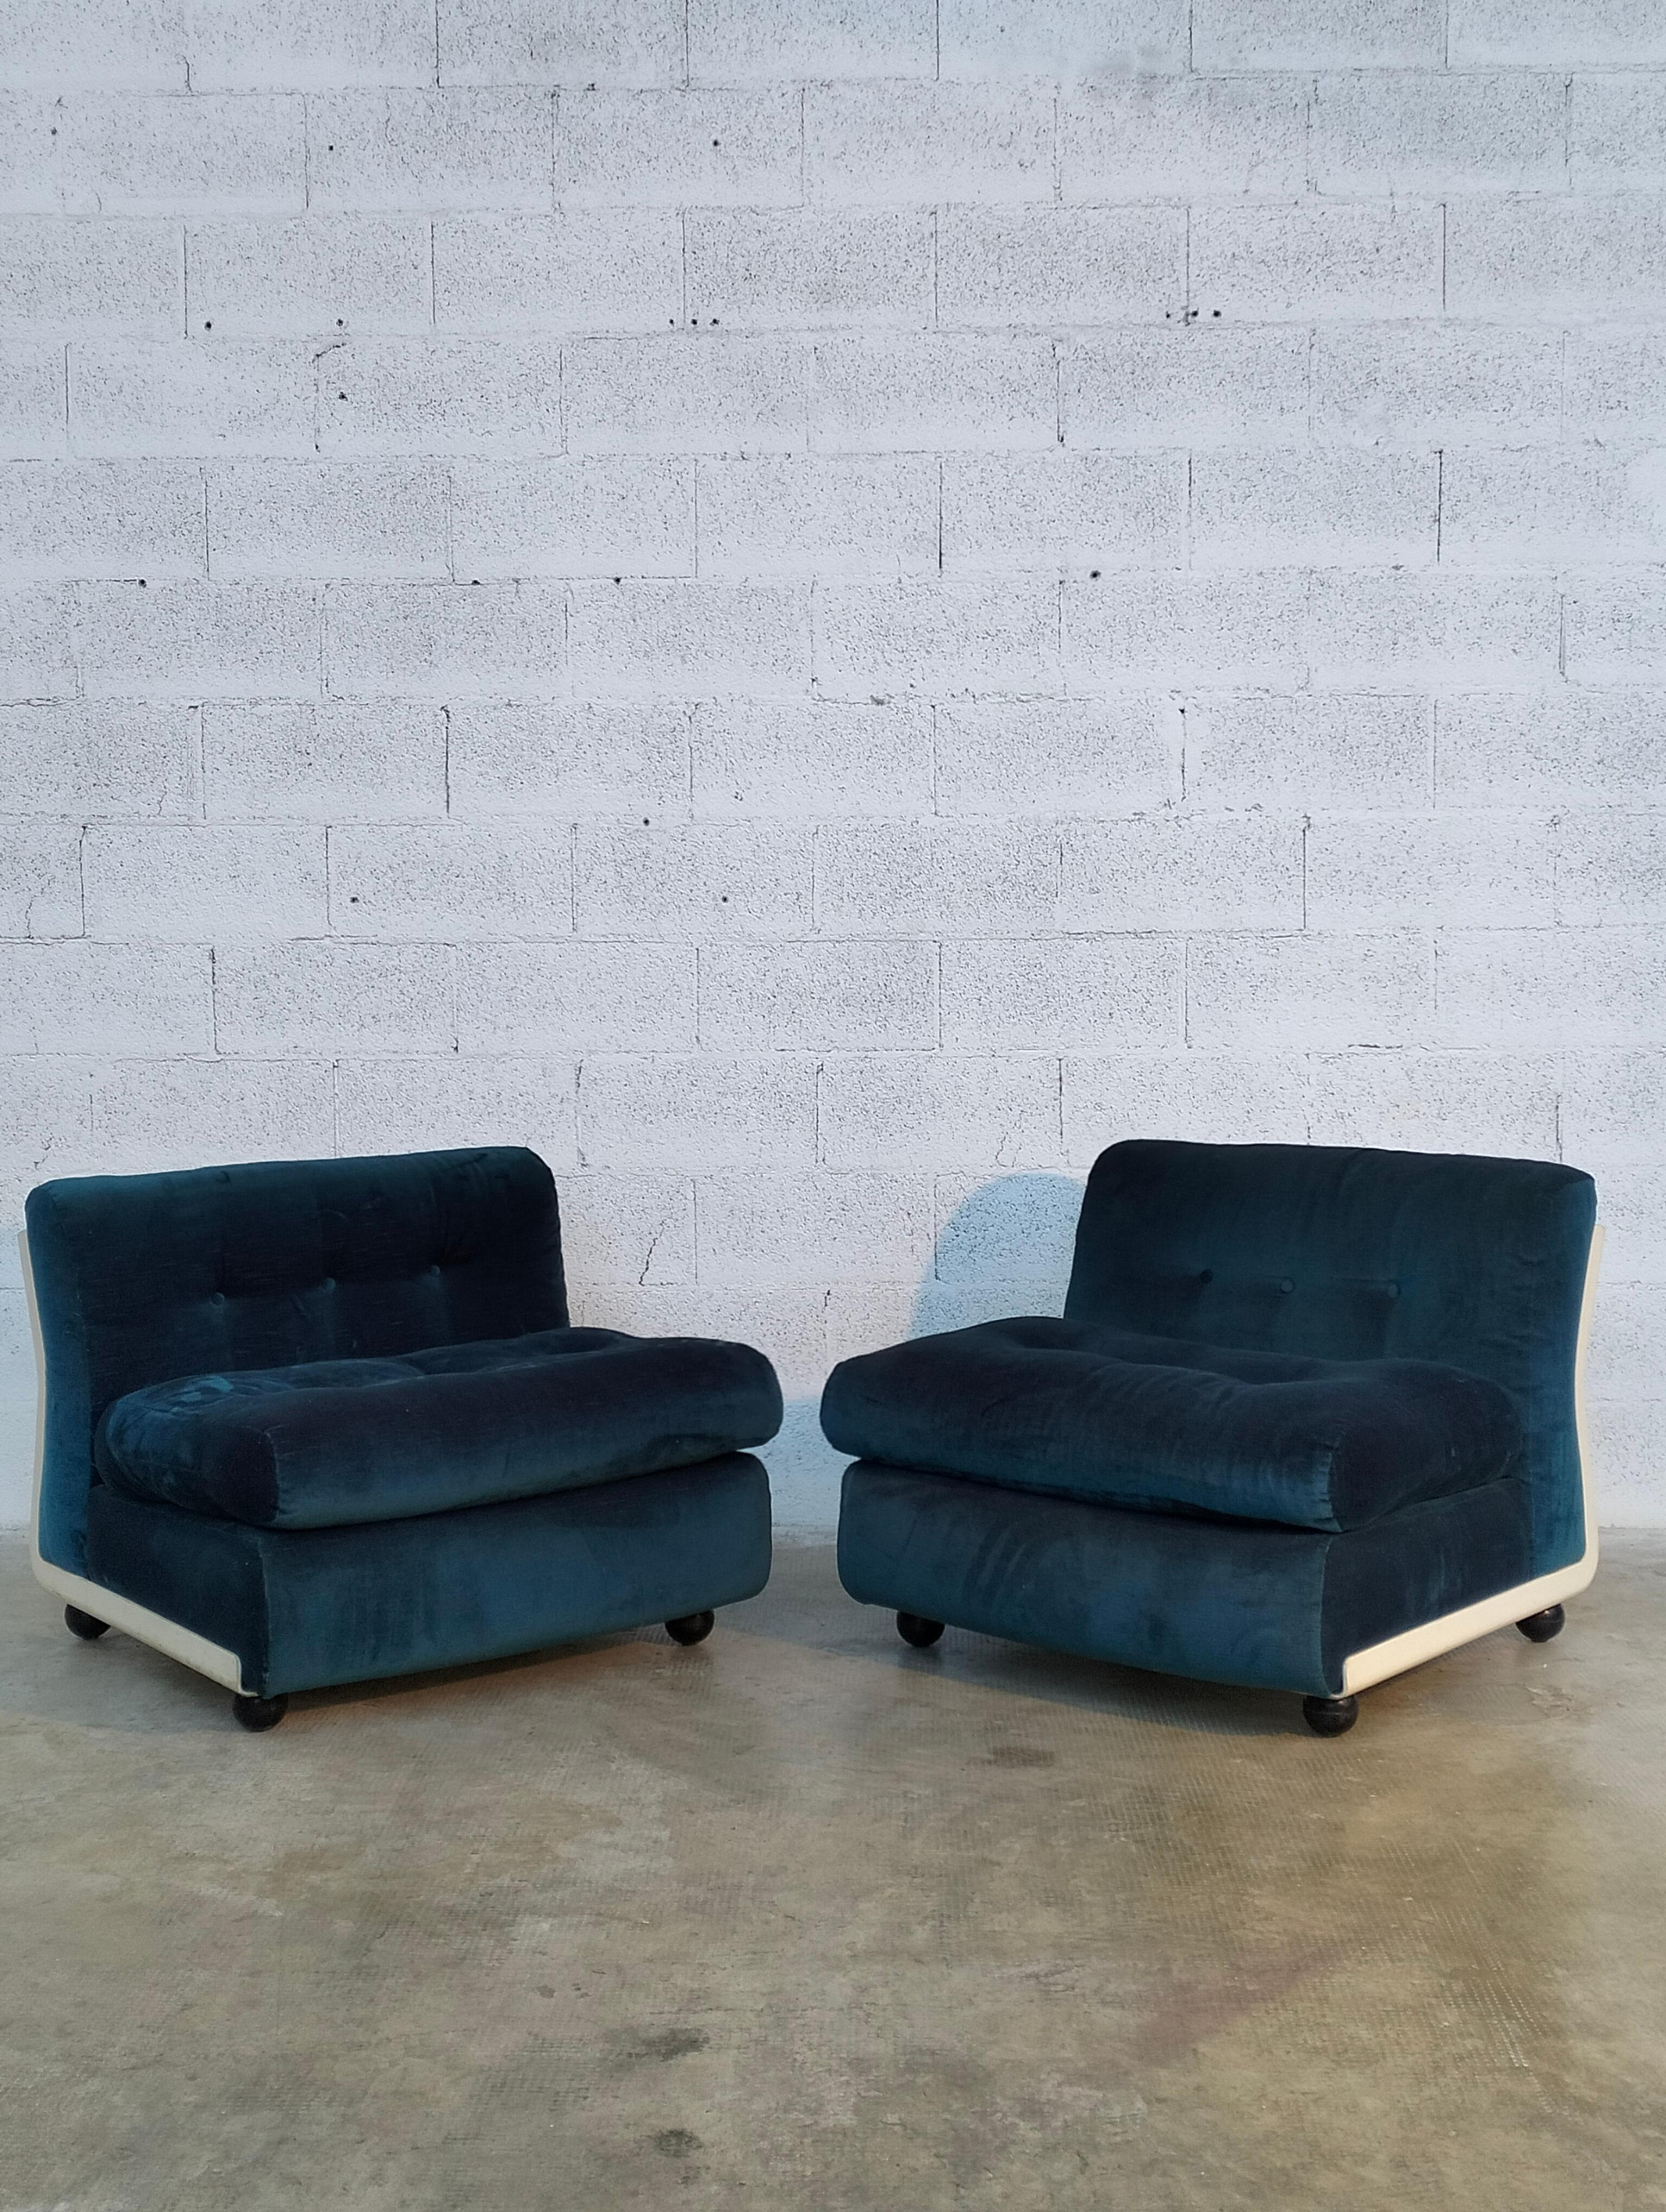 Amanta lounge chair from 1966 (the year the company C&B was founded).

The solution of the shell separated and upholstered from the padded part and made of plastic material defines the new standard of new generation seating and indeed transforms a